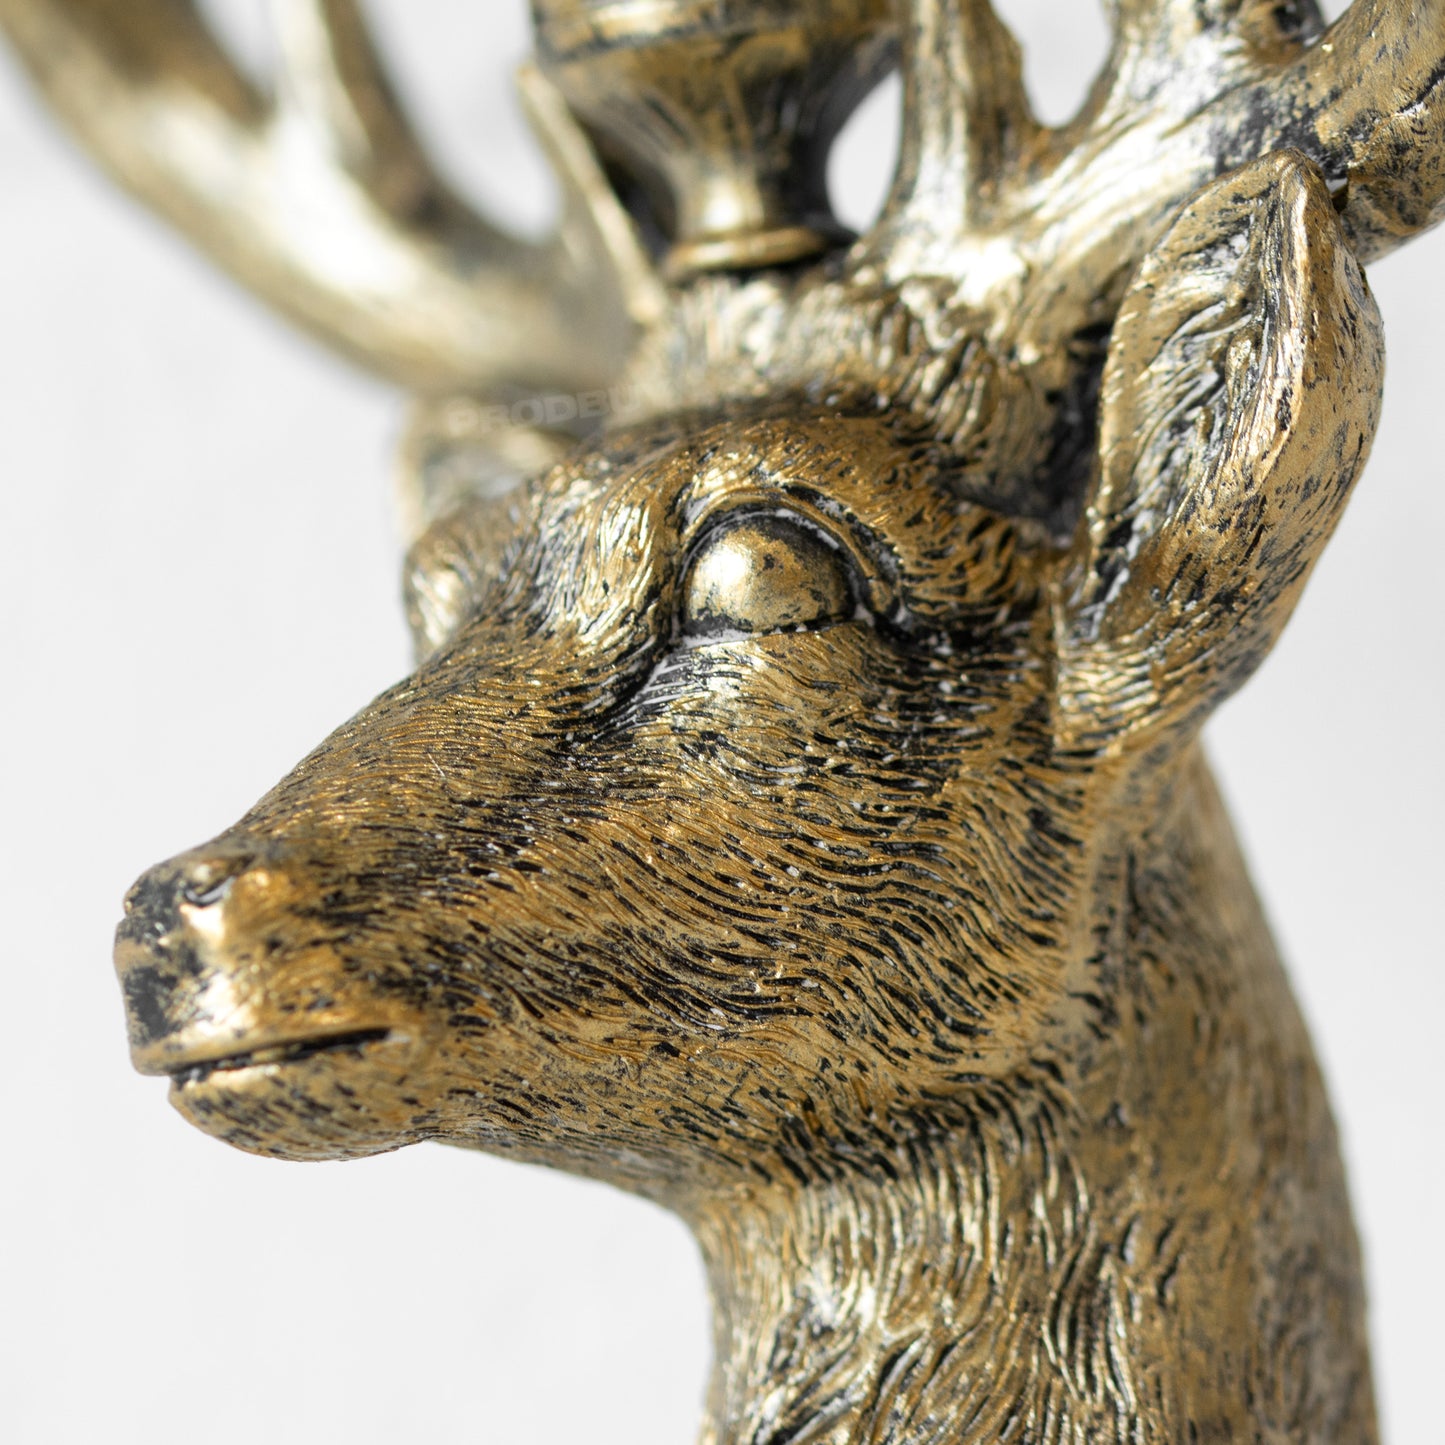 Stag Head 20cm Resin Candlestick